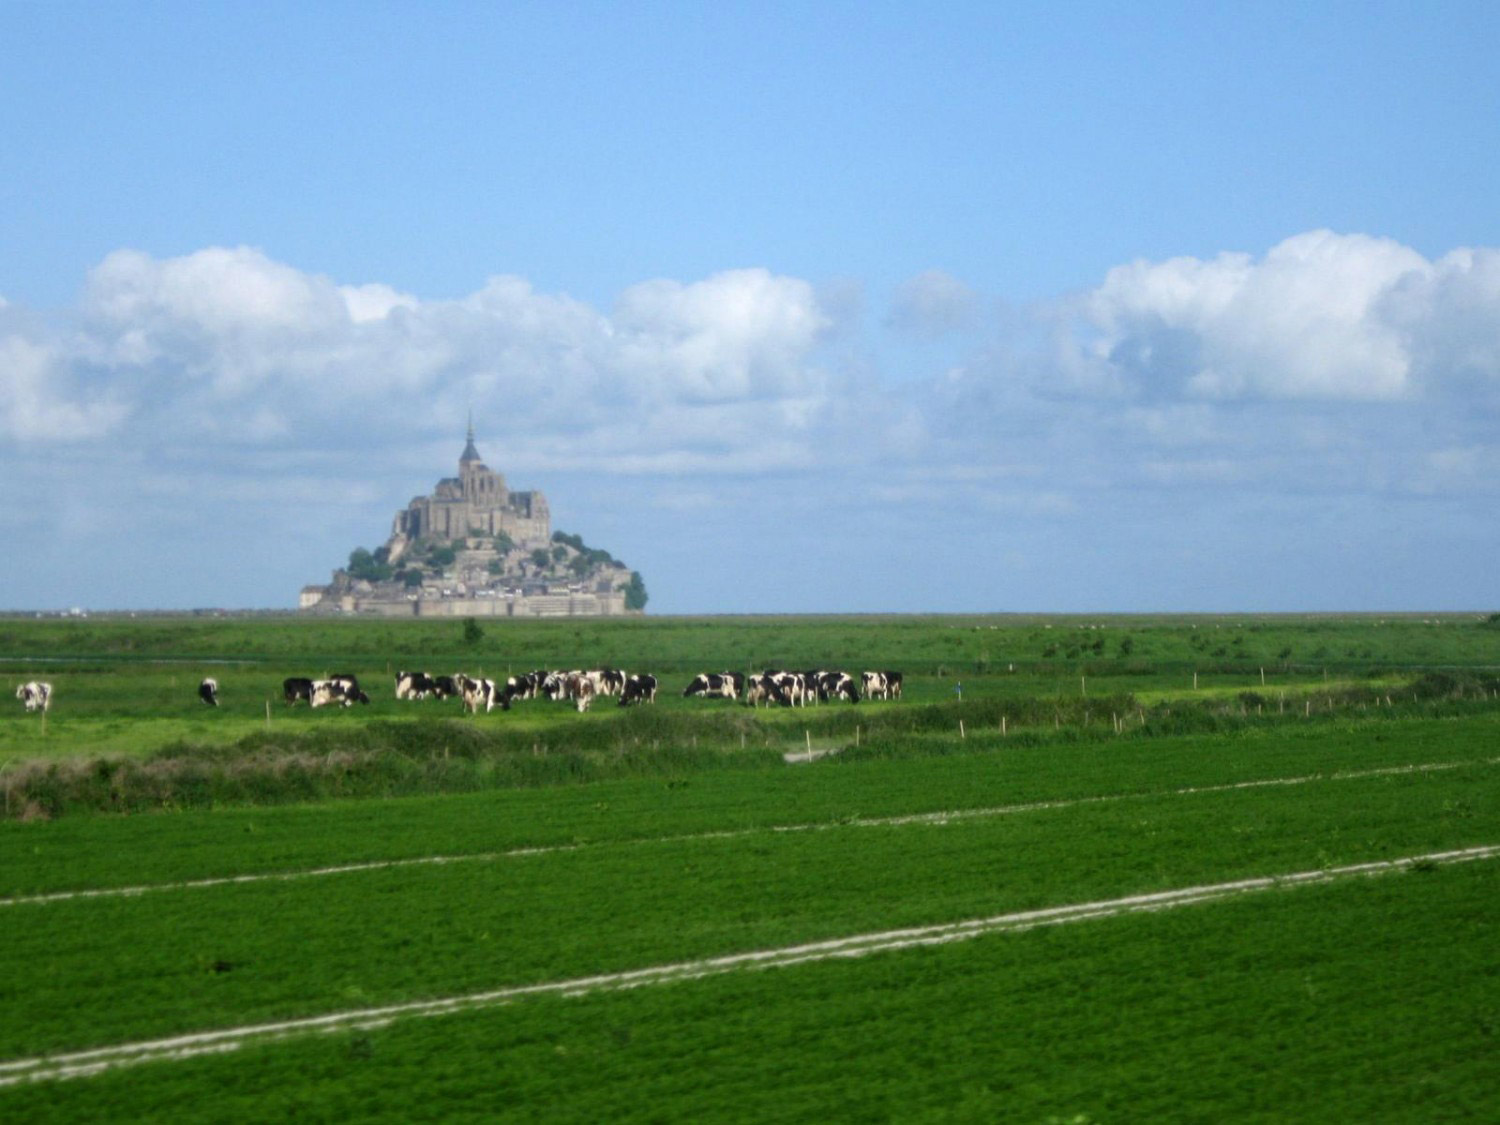 Part 2 - Mont Saint Michel and the Great Bayeux Tapestry